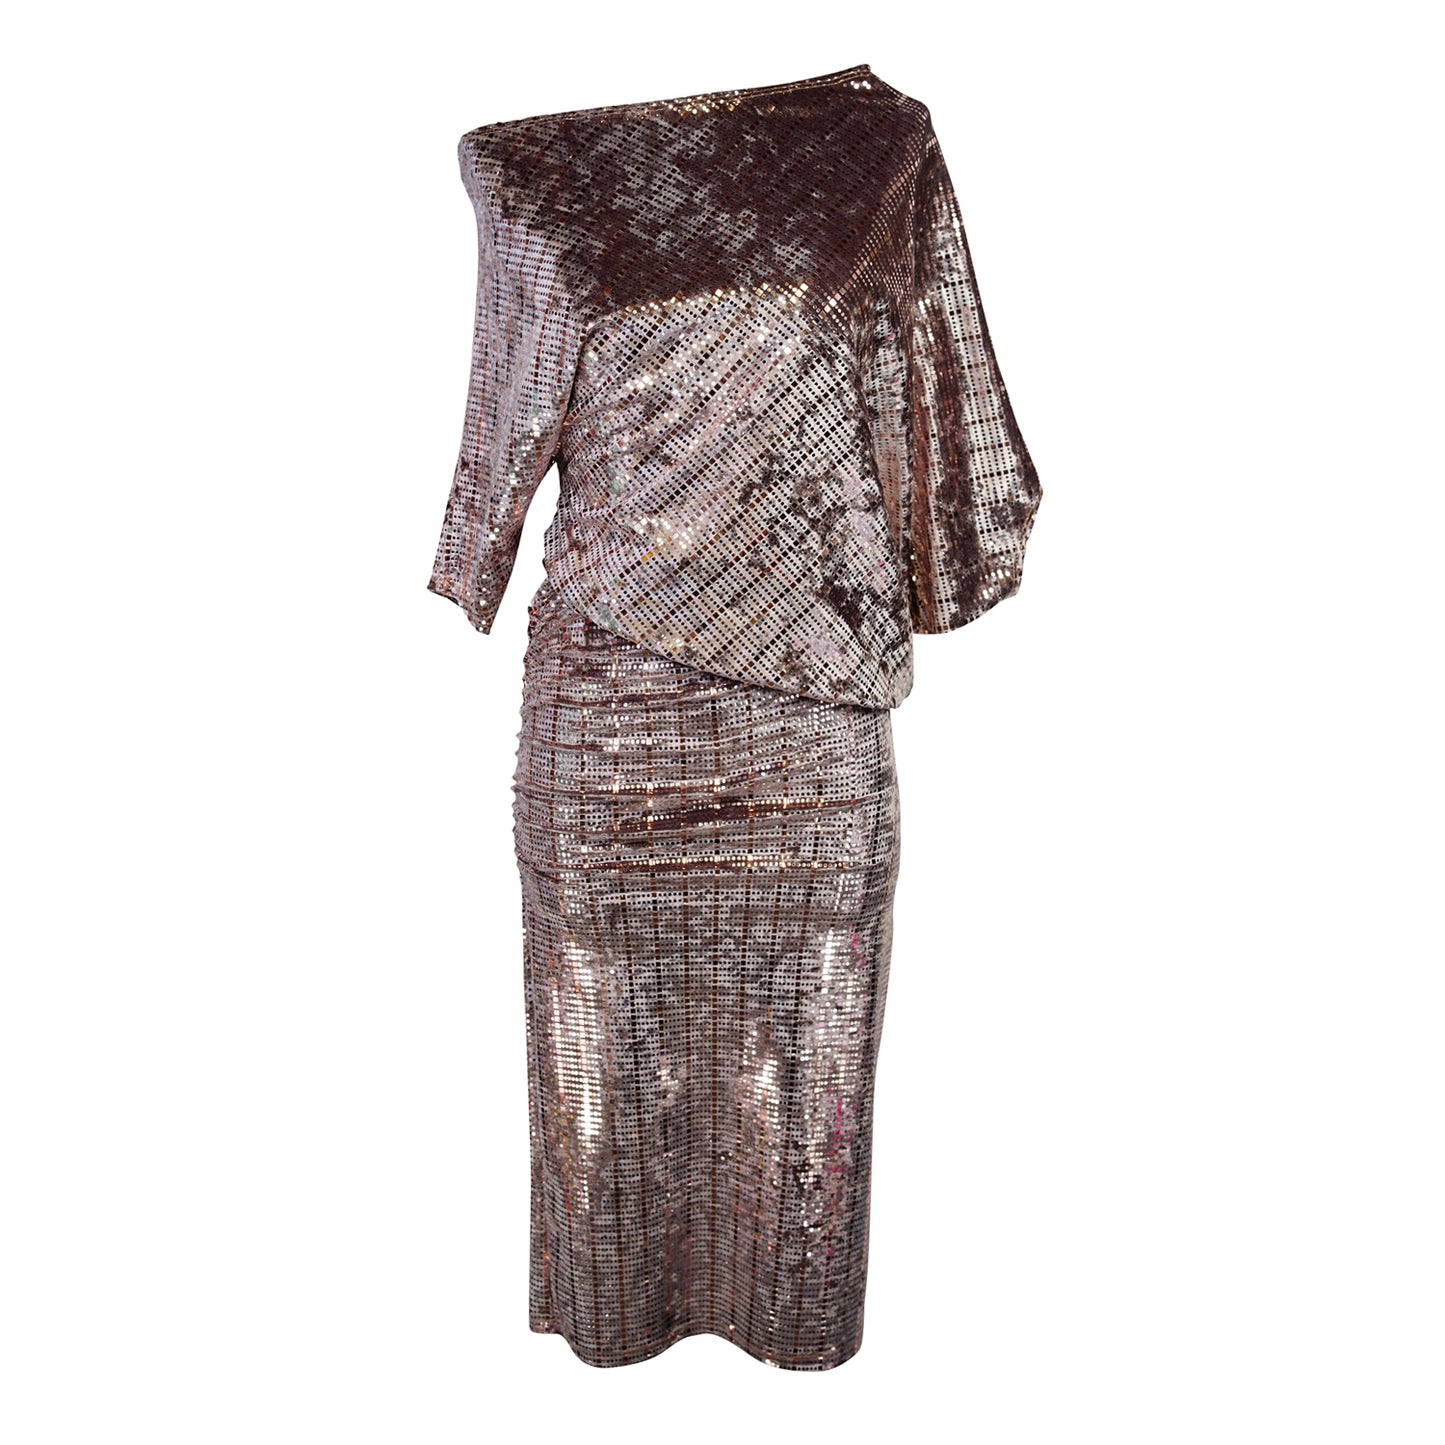 Made from velveteen fabric with a geometric metallic rose gold embellishments, this dress features a fitted pencil skirt fit with light ruching at the hip. Mid-length angled sleeves can arrange the neckline to reveal a peek of the shoulder. Hemline is just below knee length.